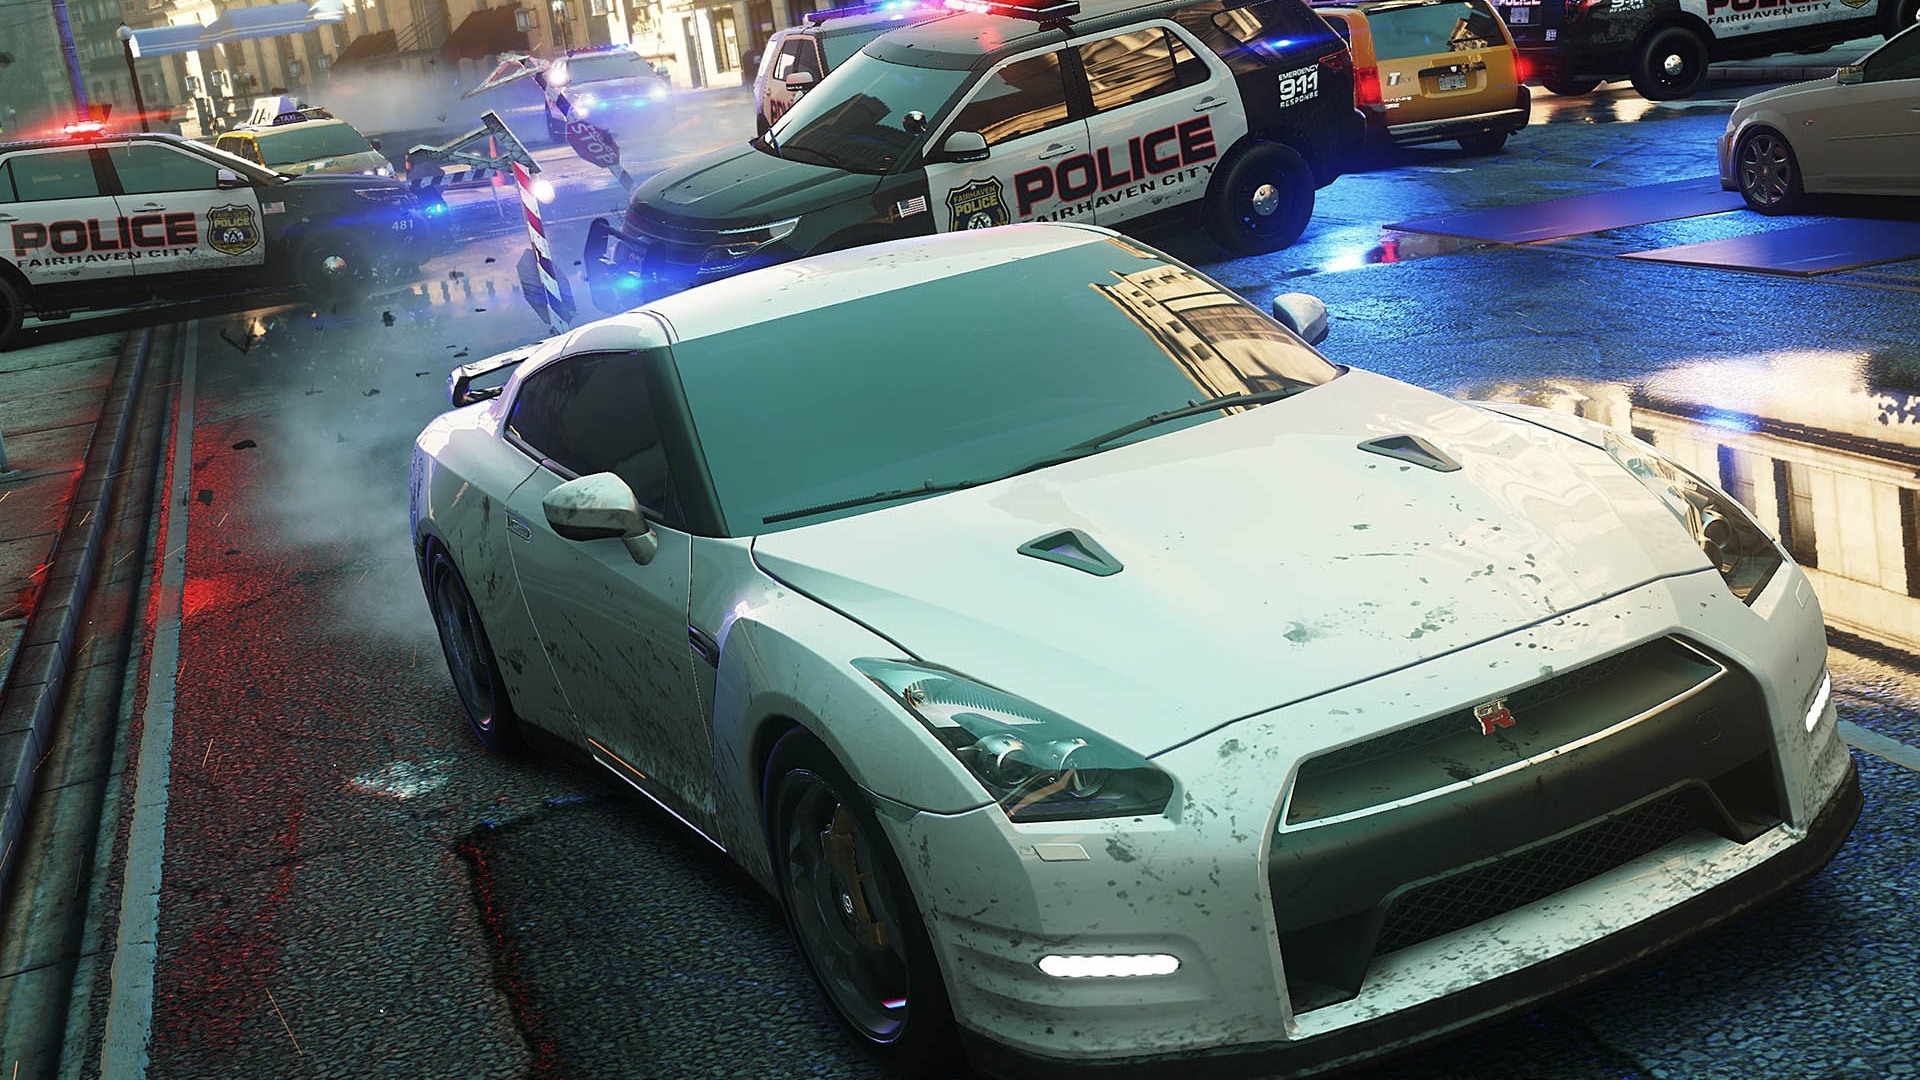 Need for Speed: Most Wanted 极品飞车17：最高通缉 高清壁纸11 - 1920x1080